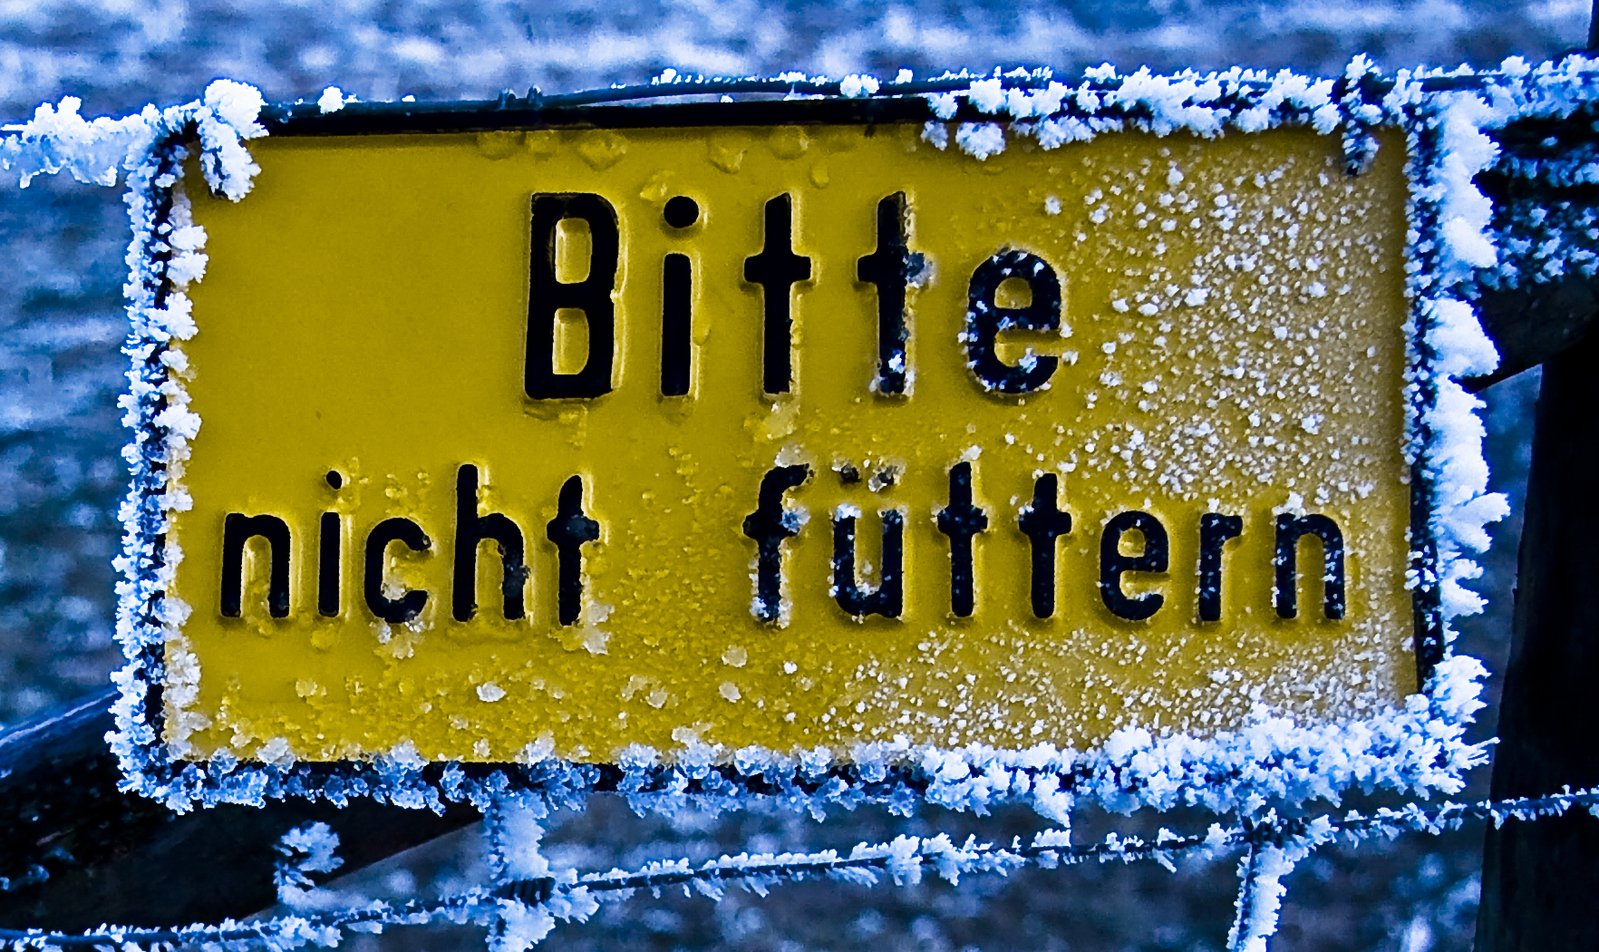 Ice-covered sign